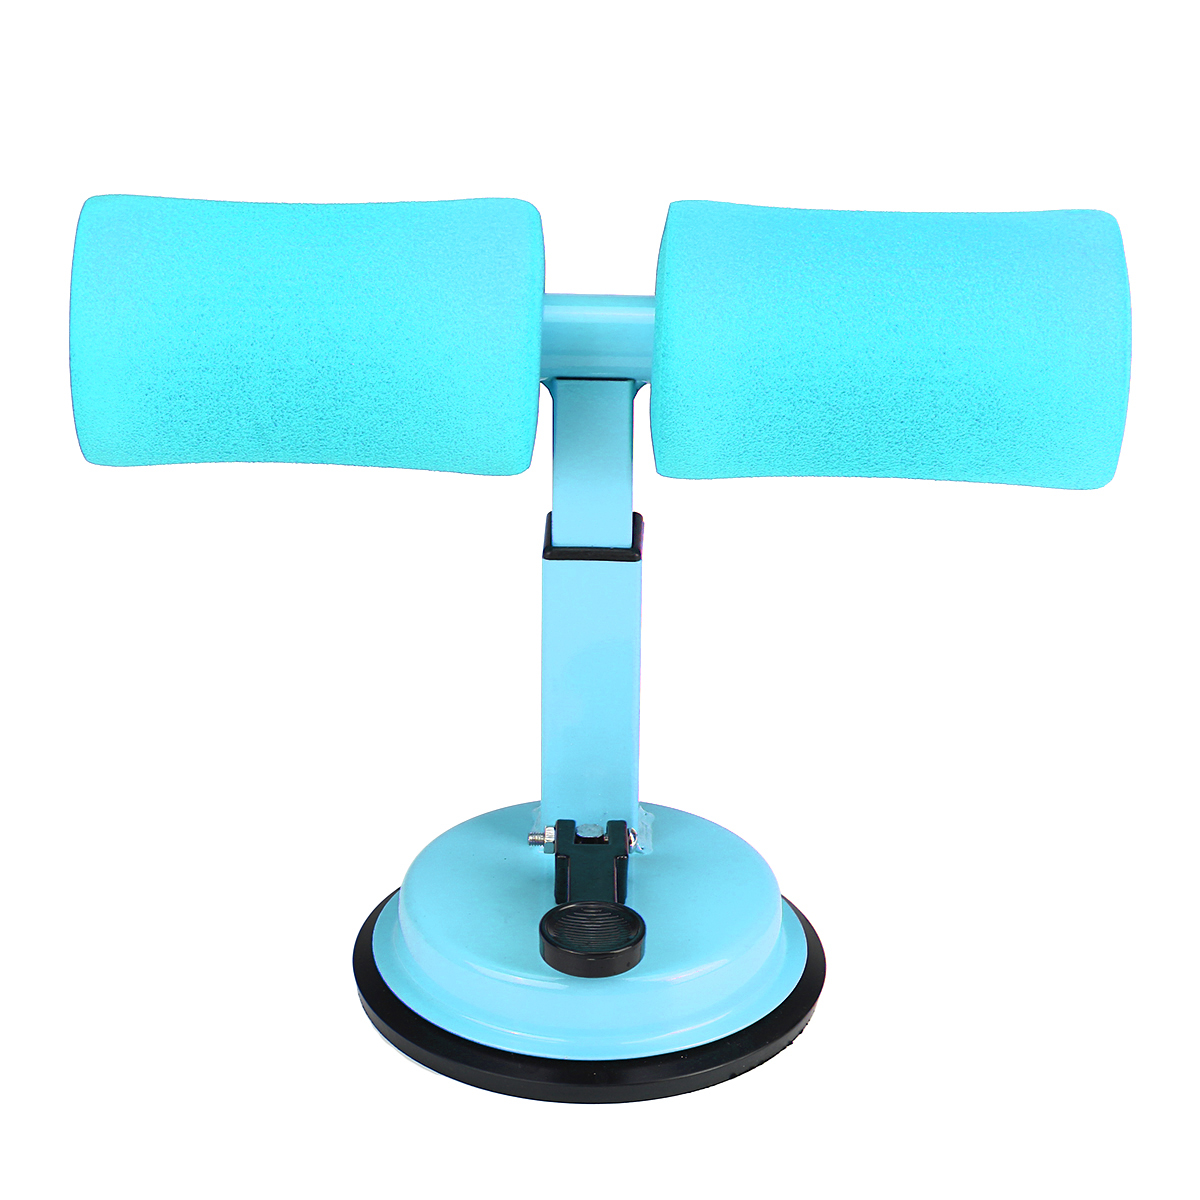 Adjustable-Sit-Up-Assistant-Bars-Abdominal-Core-Fitness-Workout-Stand-Portable-Situp-Suction-Home-Gy-1697292-7